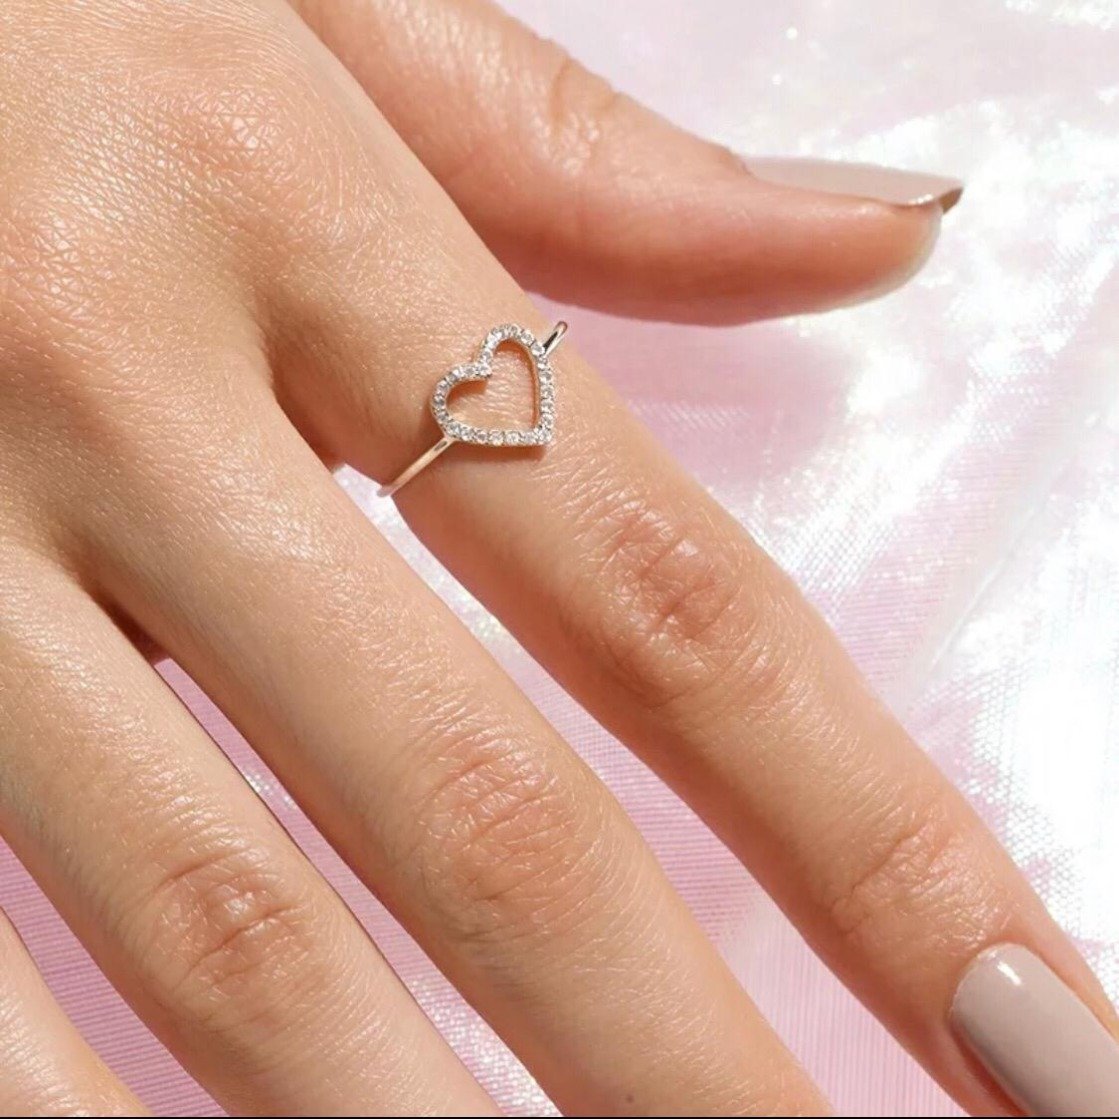 Cute Heart Ring/18K White Gold & Cubic Zirconia - infinityXinfinity.co.uk